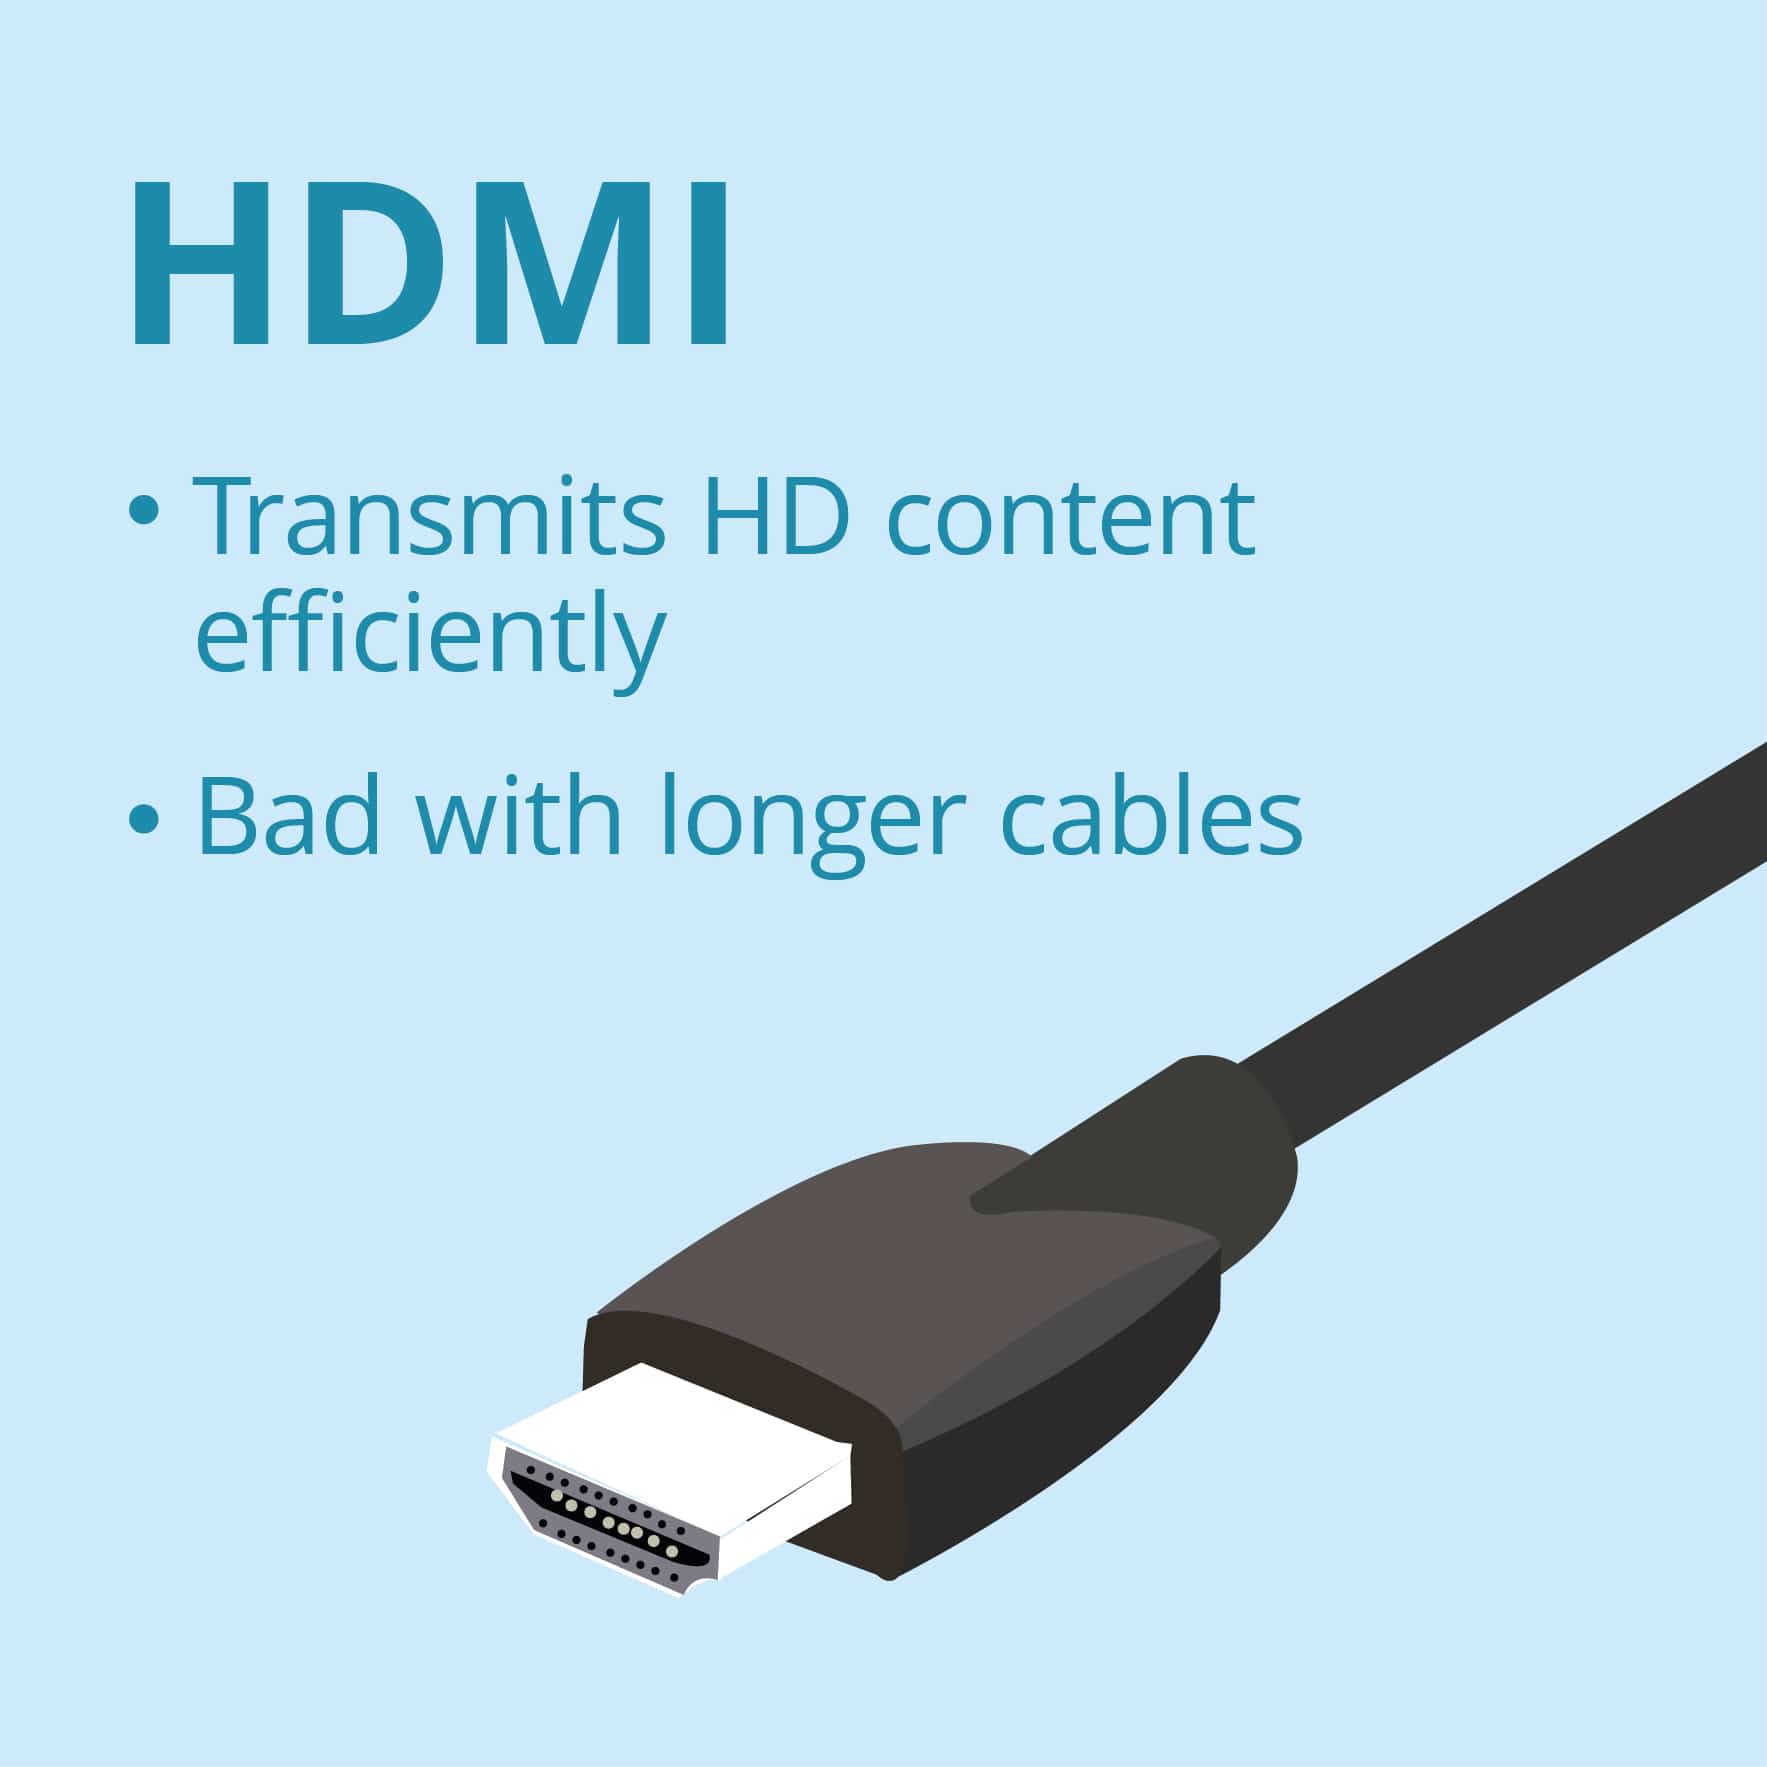 What is the difference between an HDMI and DisplayPort connection